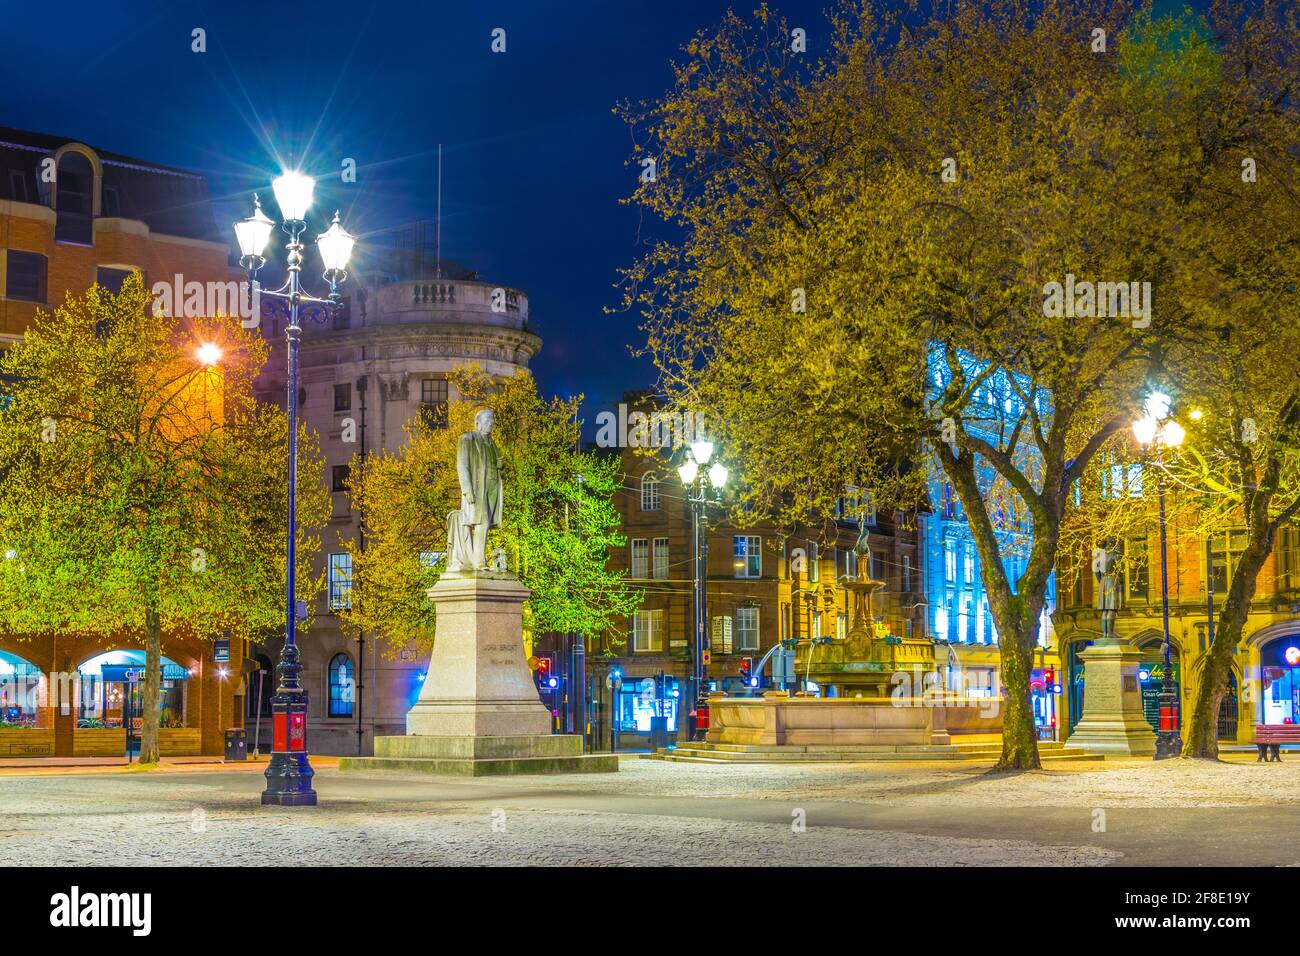 MANCHESTER, UNITED KINGDOM, APRIL 11, 2017: Night view of the Statue of John Bright on Albert square in front of the town hall in Manchester, England Stock Photo